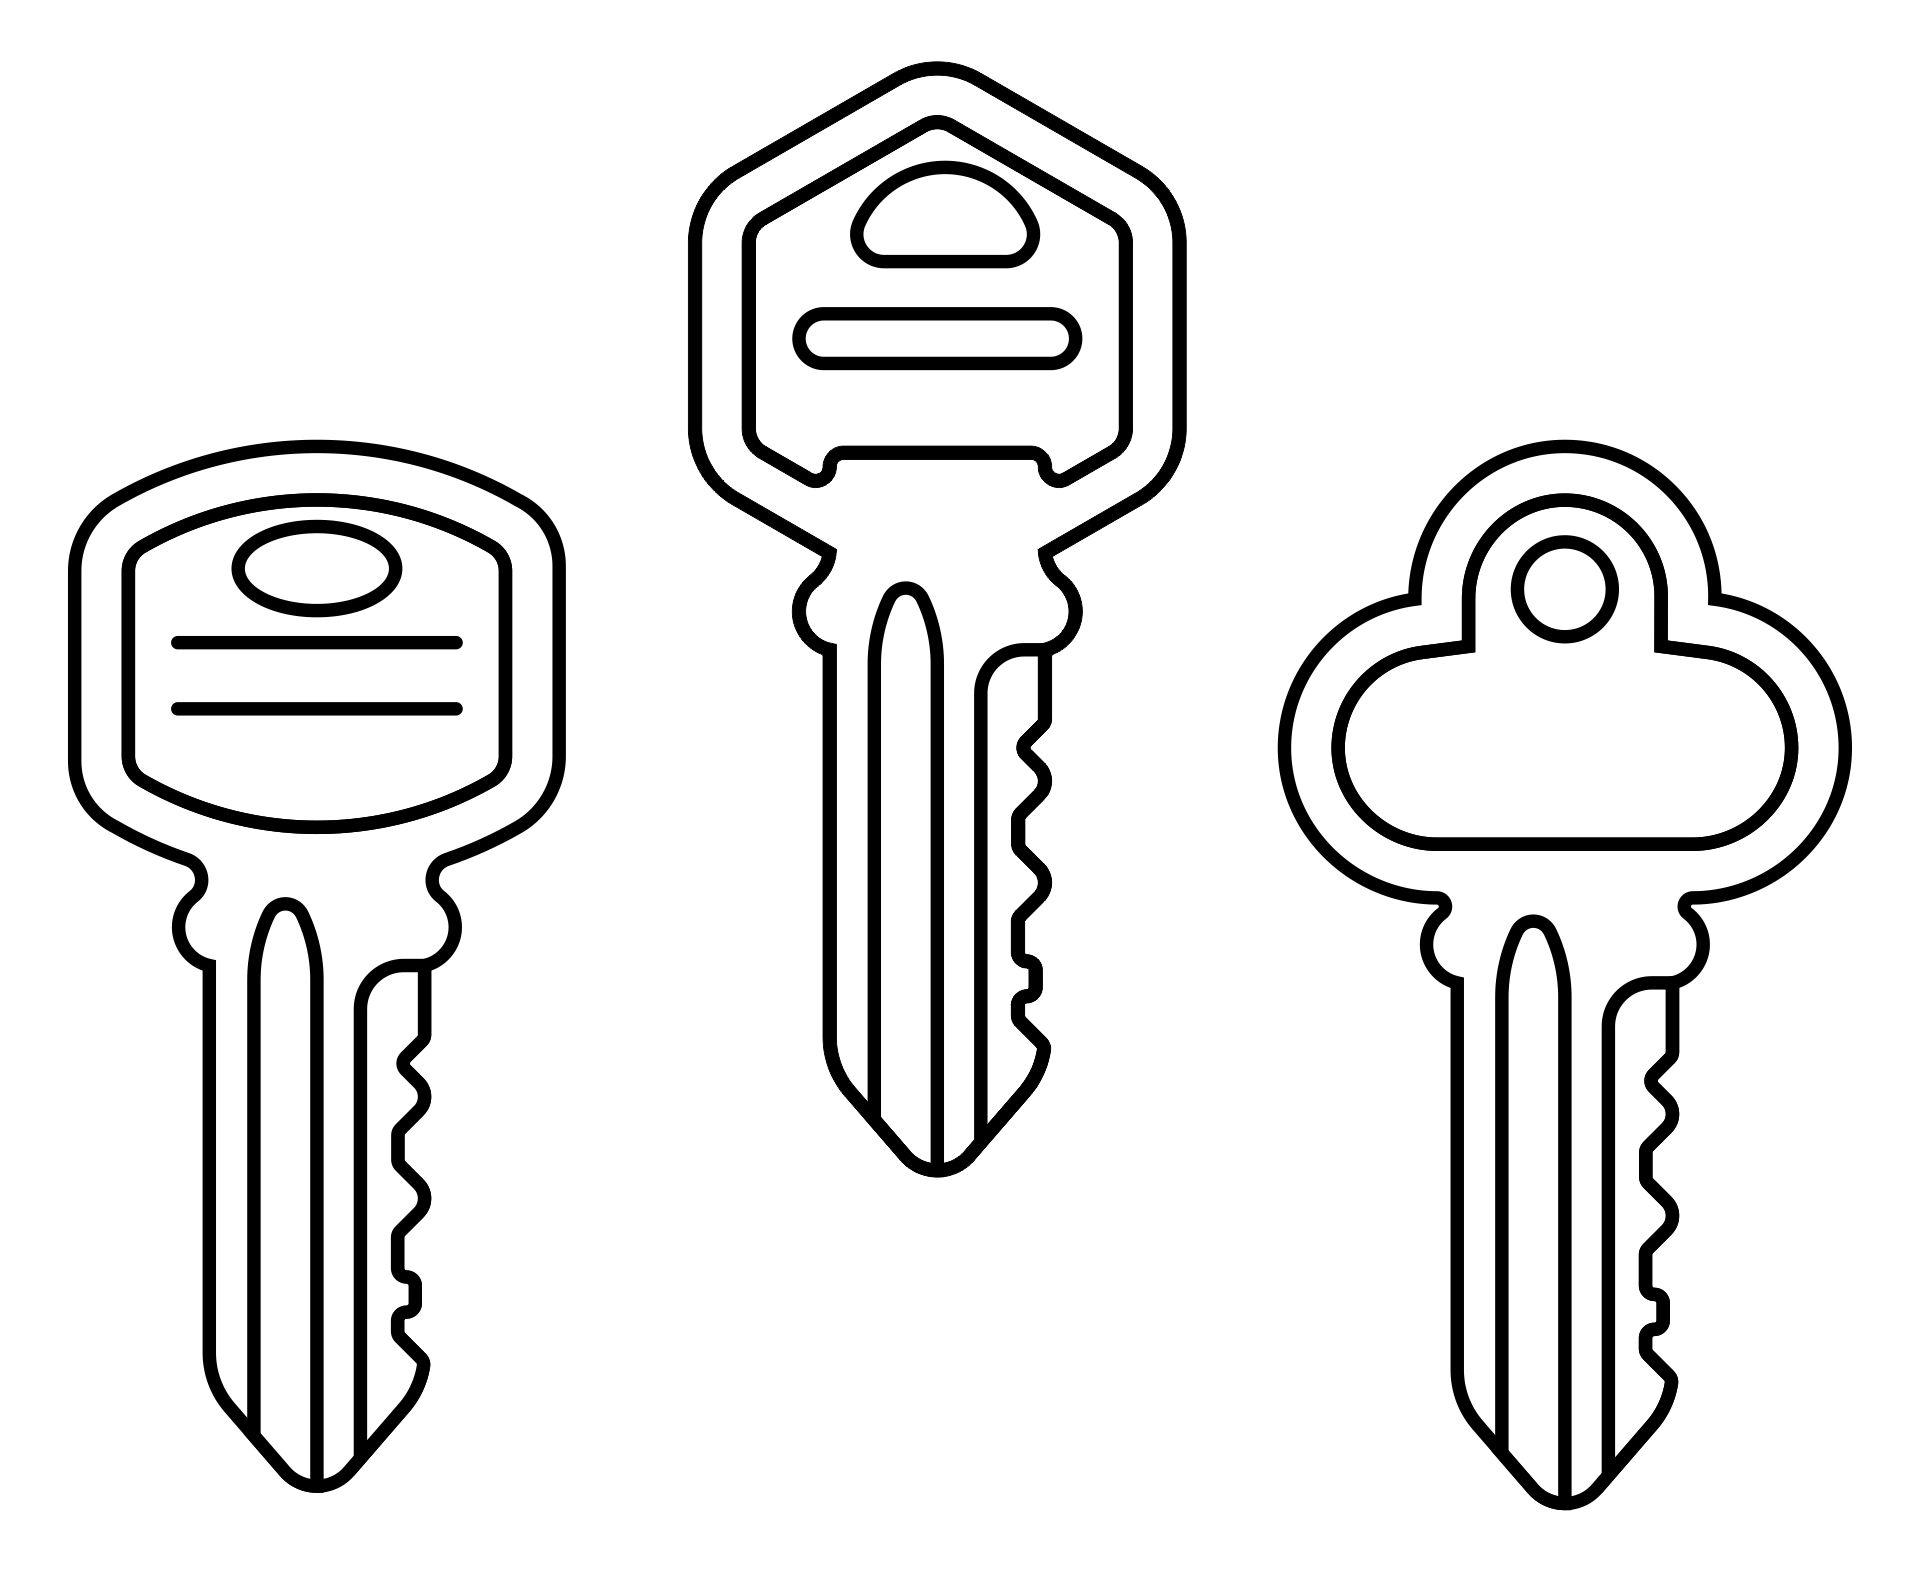 7-best-images-of-printable-picture-of-a-key-key-outline-clip-art-free-printable-key-shape